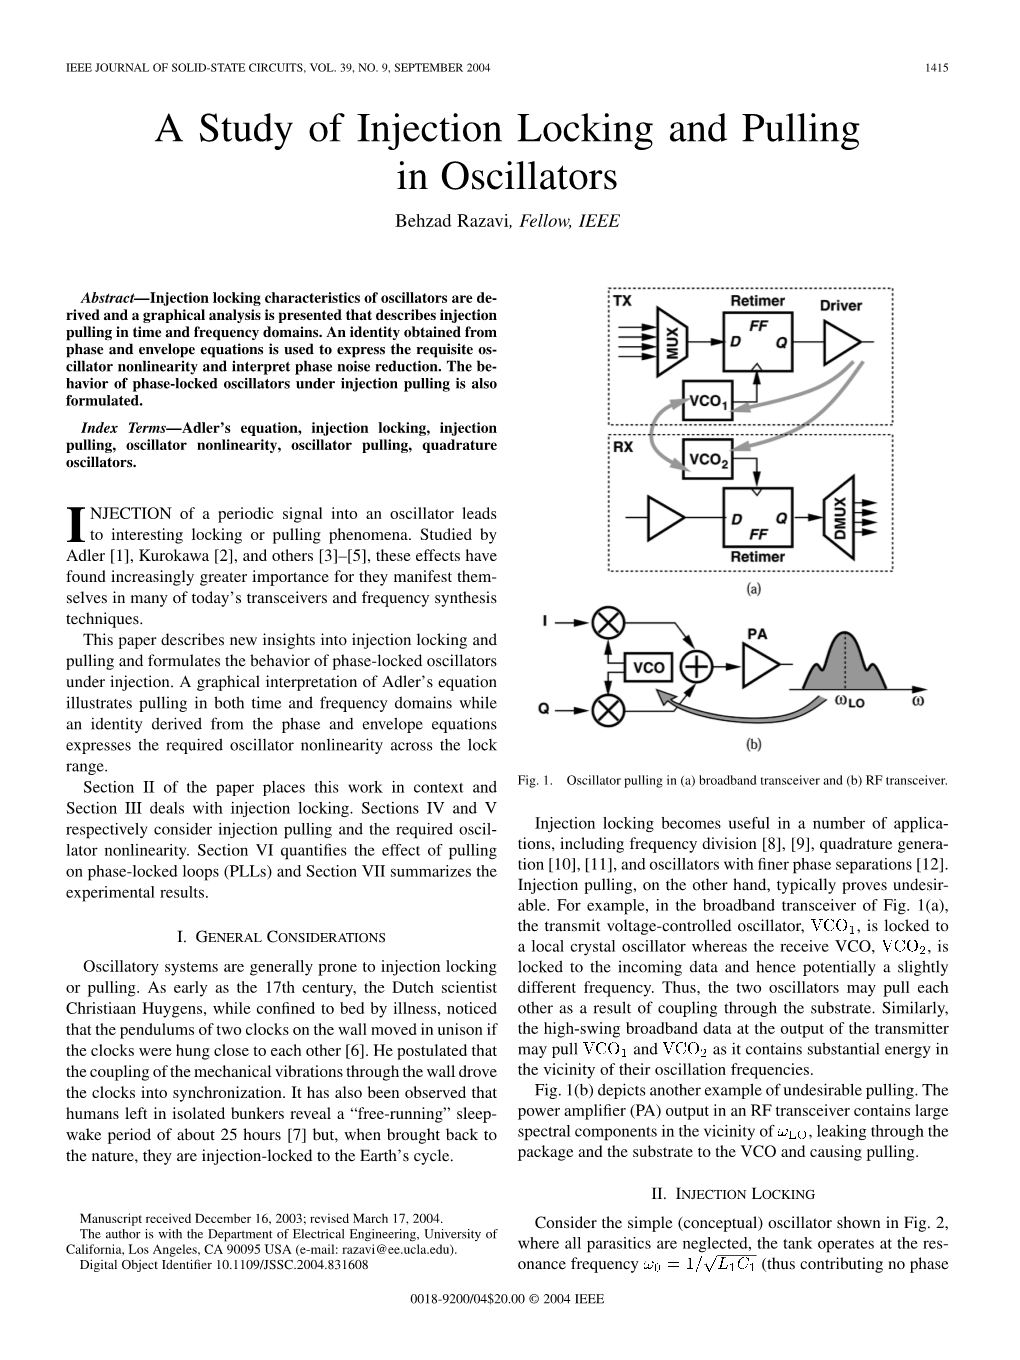 "A Study of Injection Locking and Pulling in Oscillators," IEEE Journal